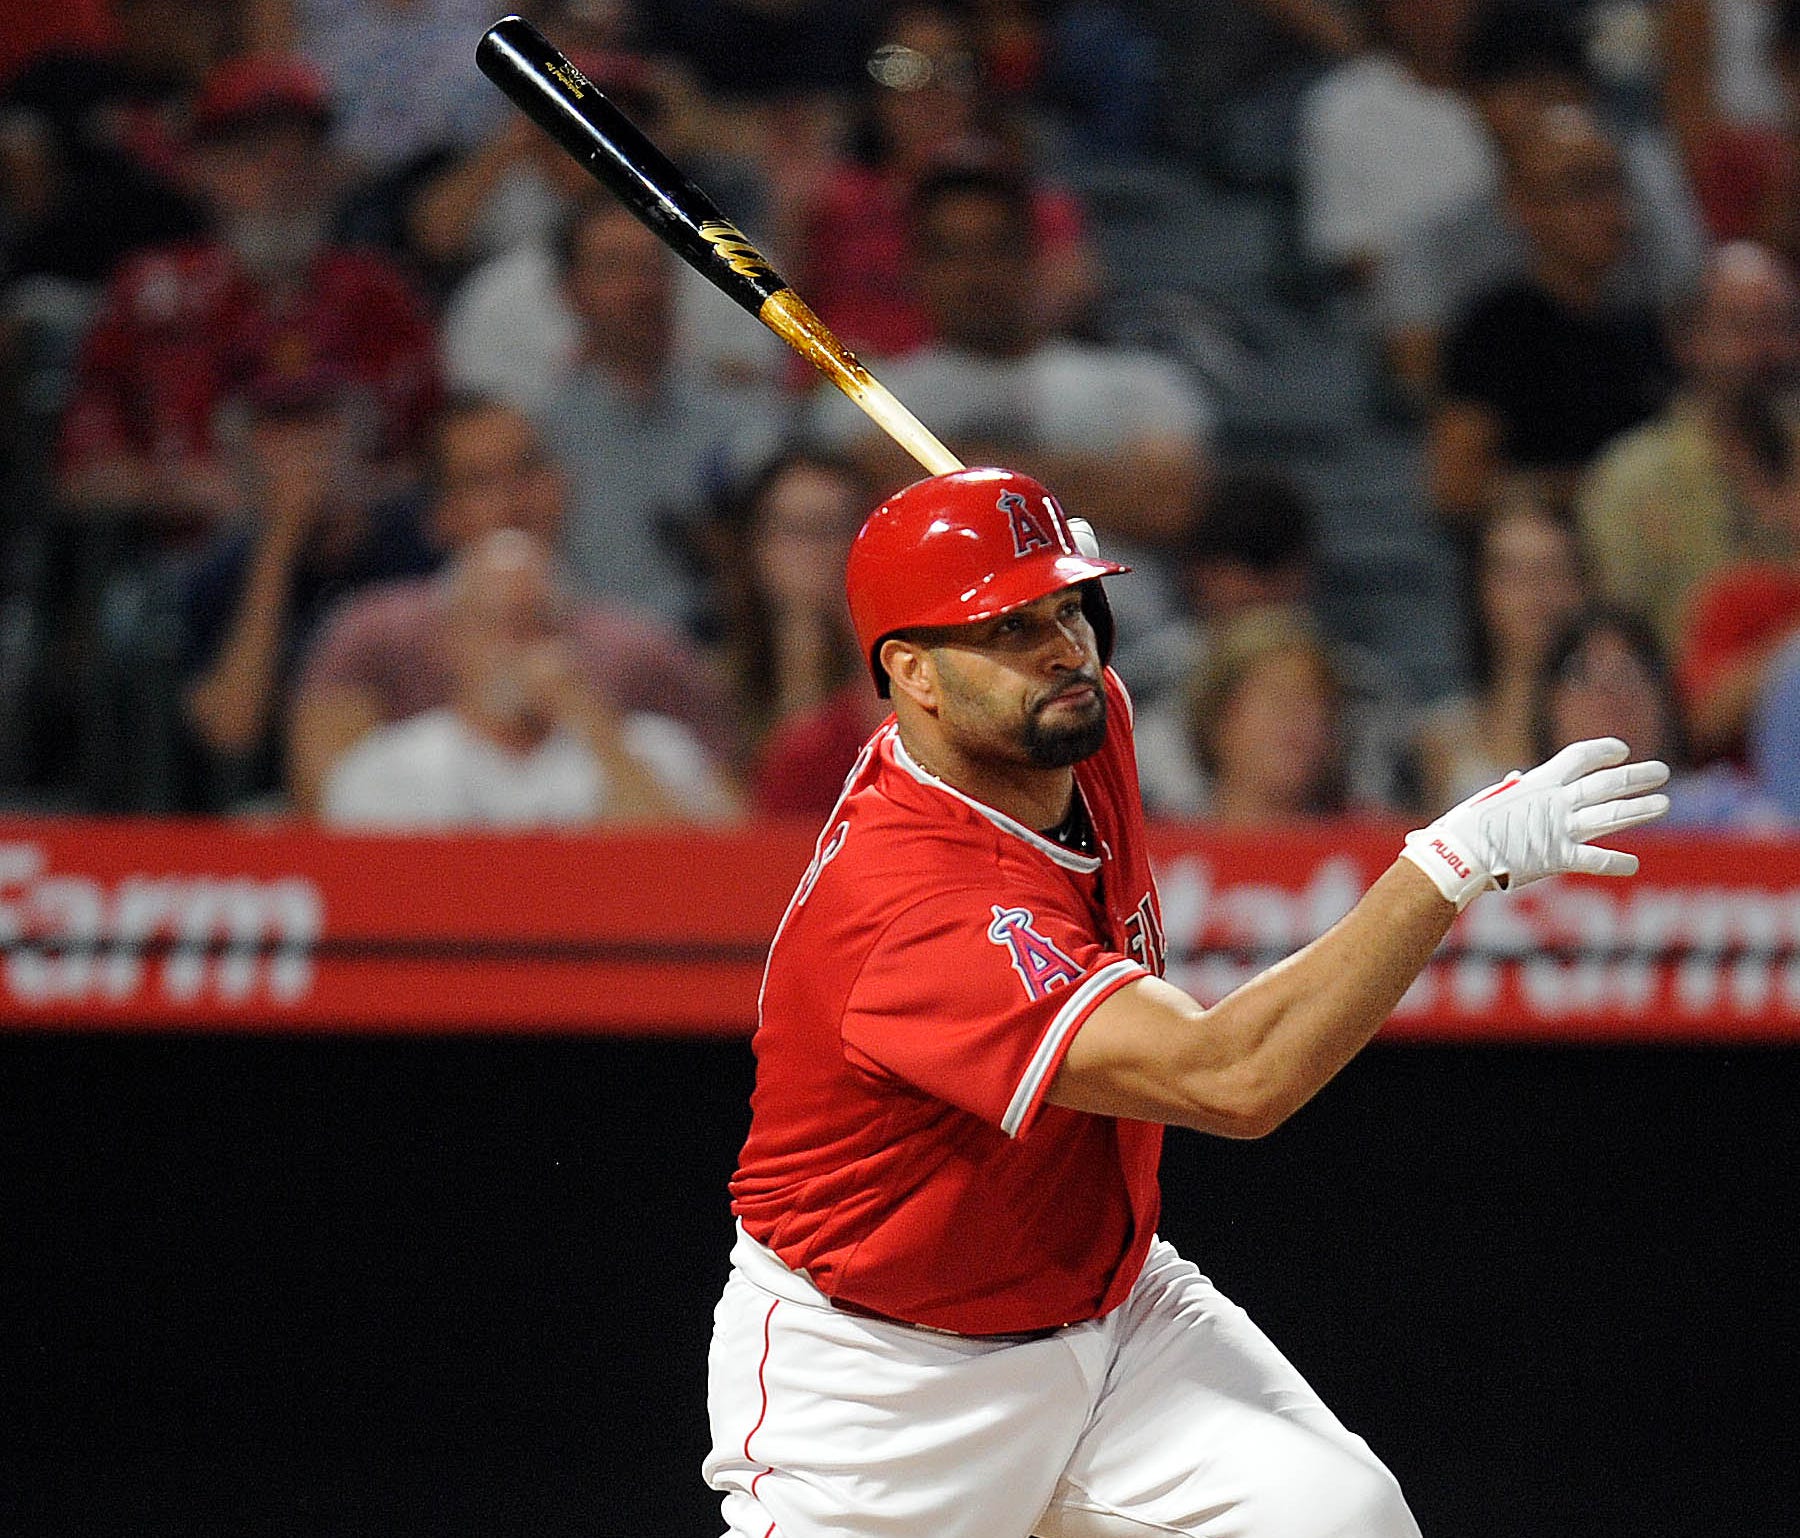 Albert Pujols passed Ken Griffey Jr. for sixth place on the career home run list.